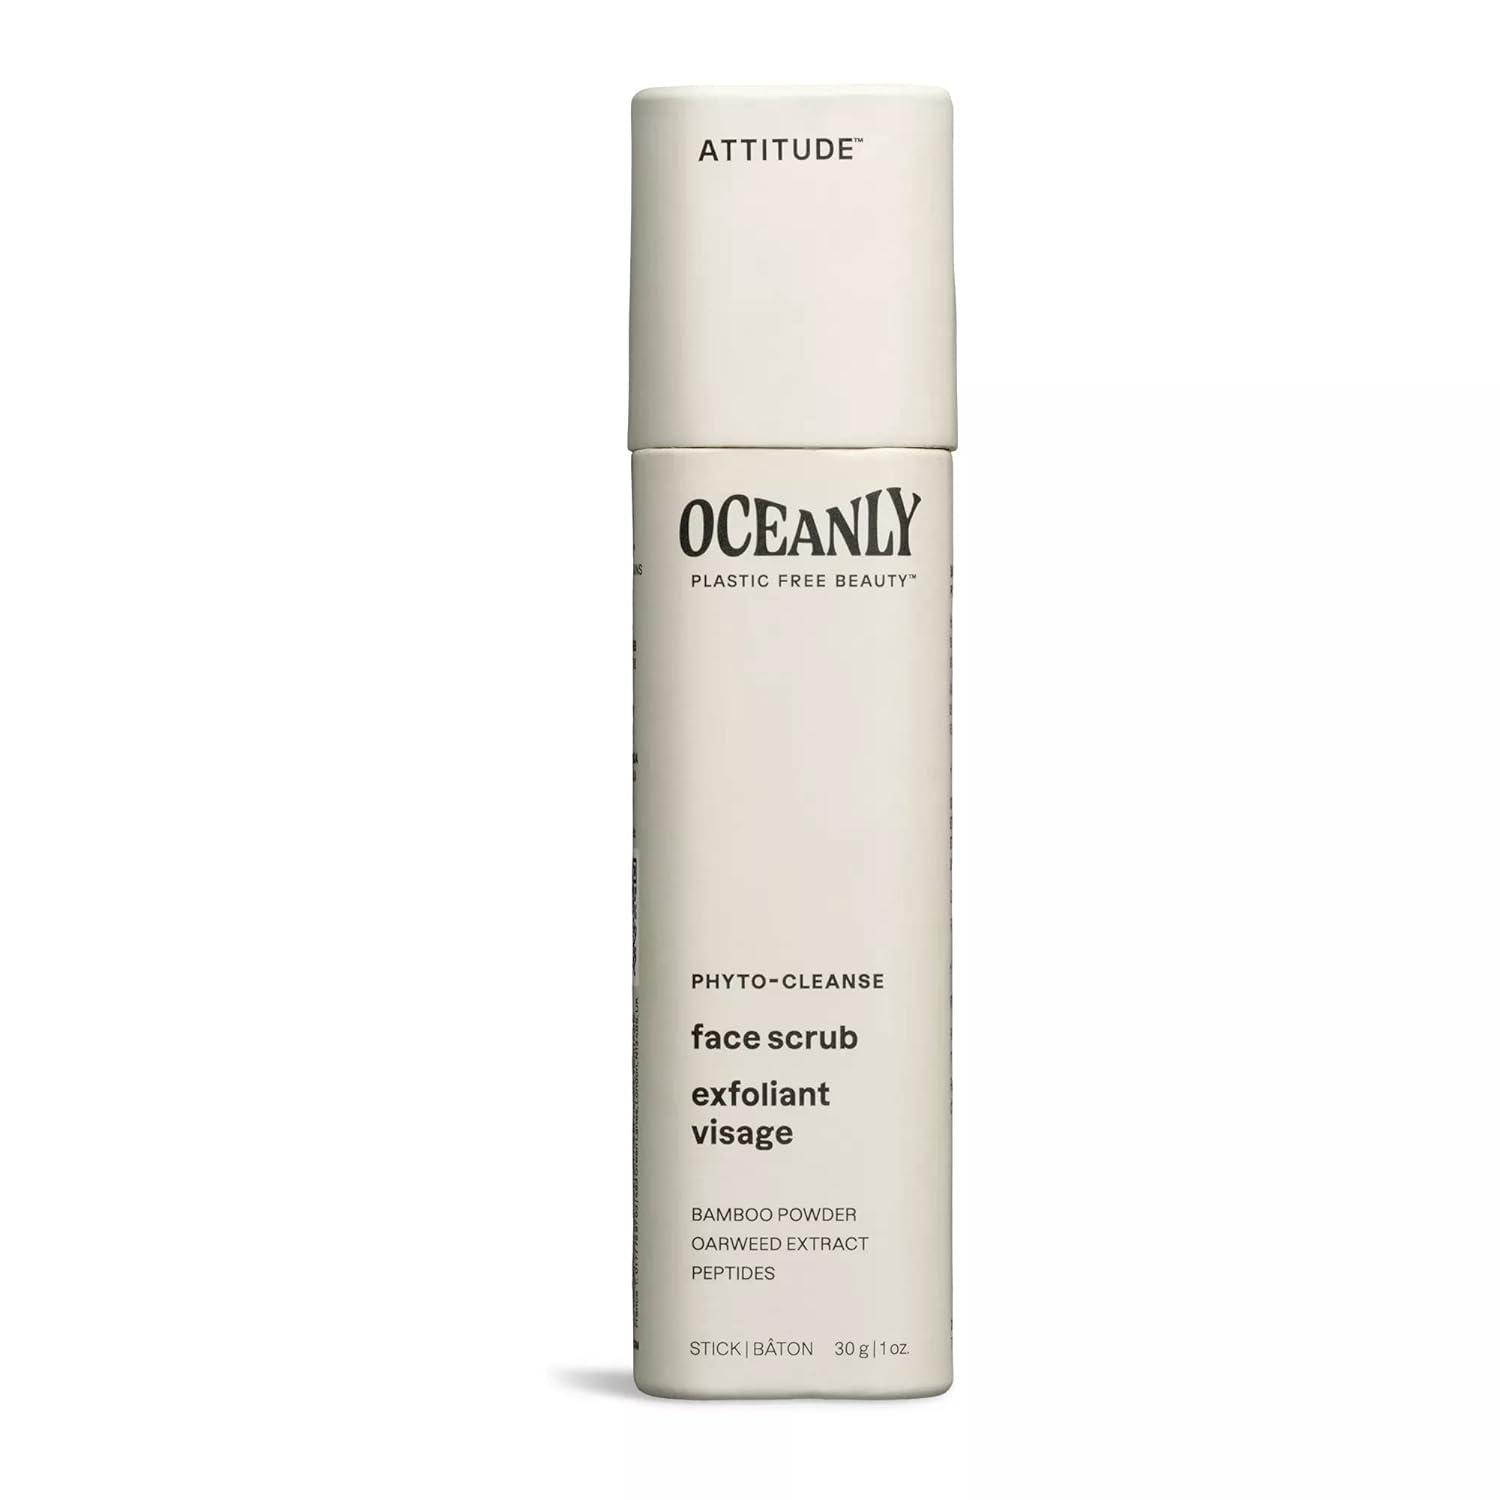 ATTITUDE Oceanly Face Scrub Stick, EWG Verified, Plastic-free, Plant and Mineral-Based Ingredients, Vegan and Cruelty-free Beauty Products, PHYTO CLEANSE, Unscented, 1 Ounce